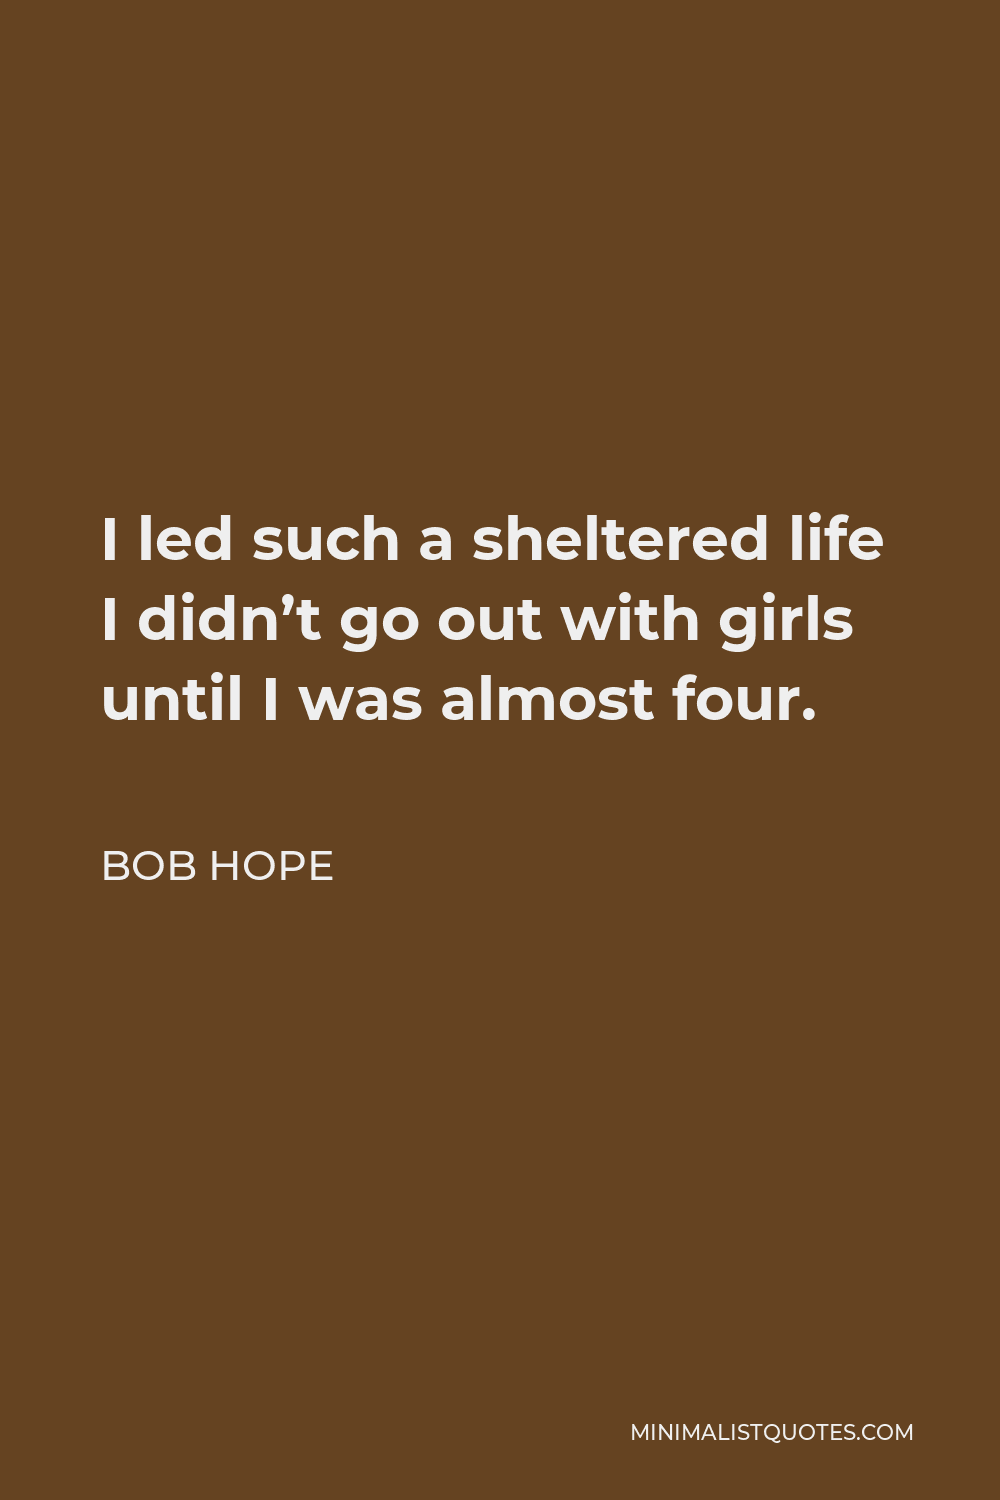 Bob Hope Quote - I led such a sheltered life I didn’t go out with girls until I was almost four.